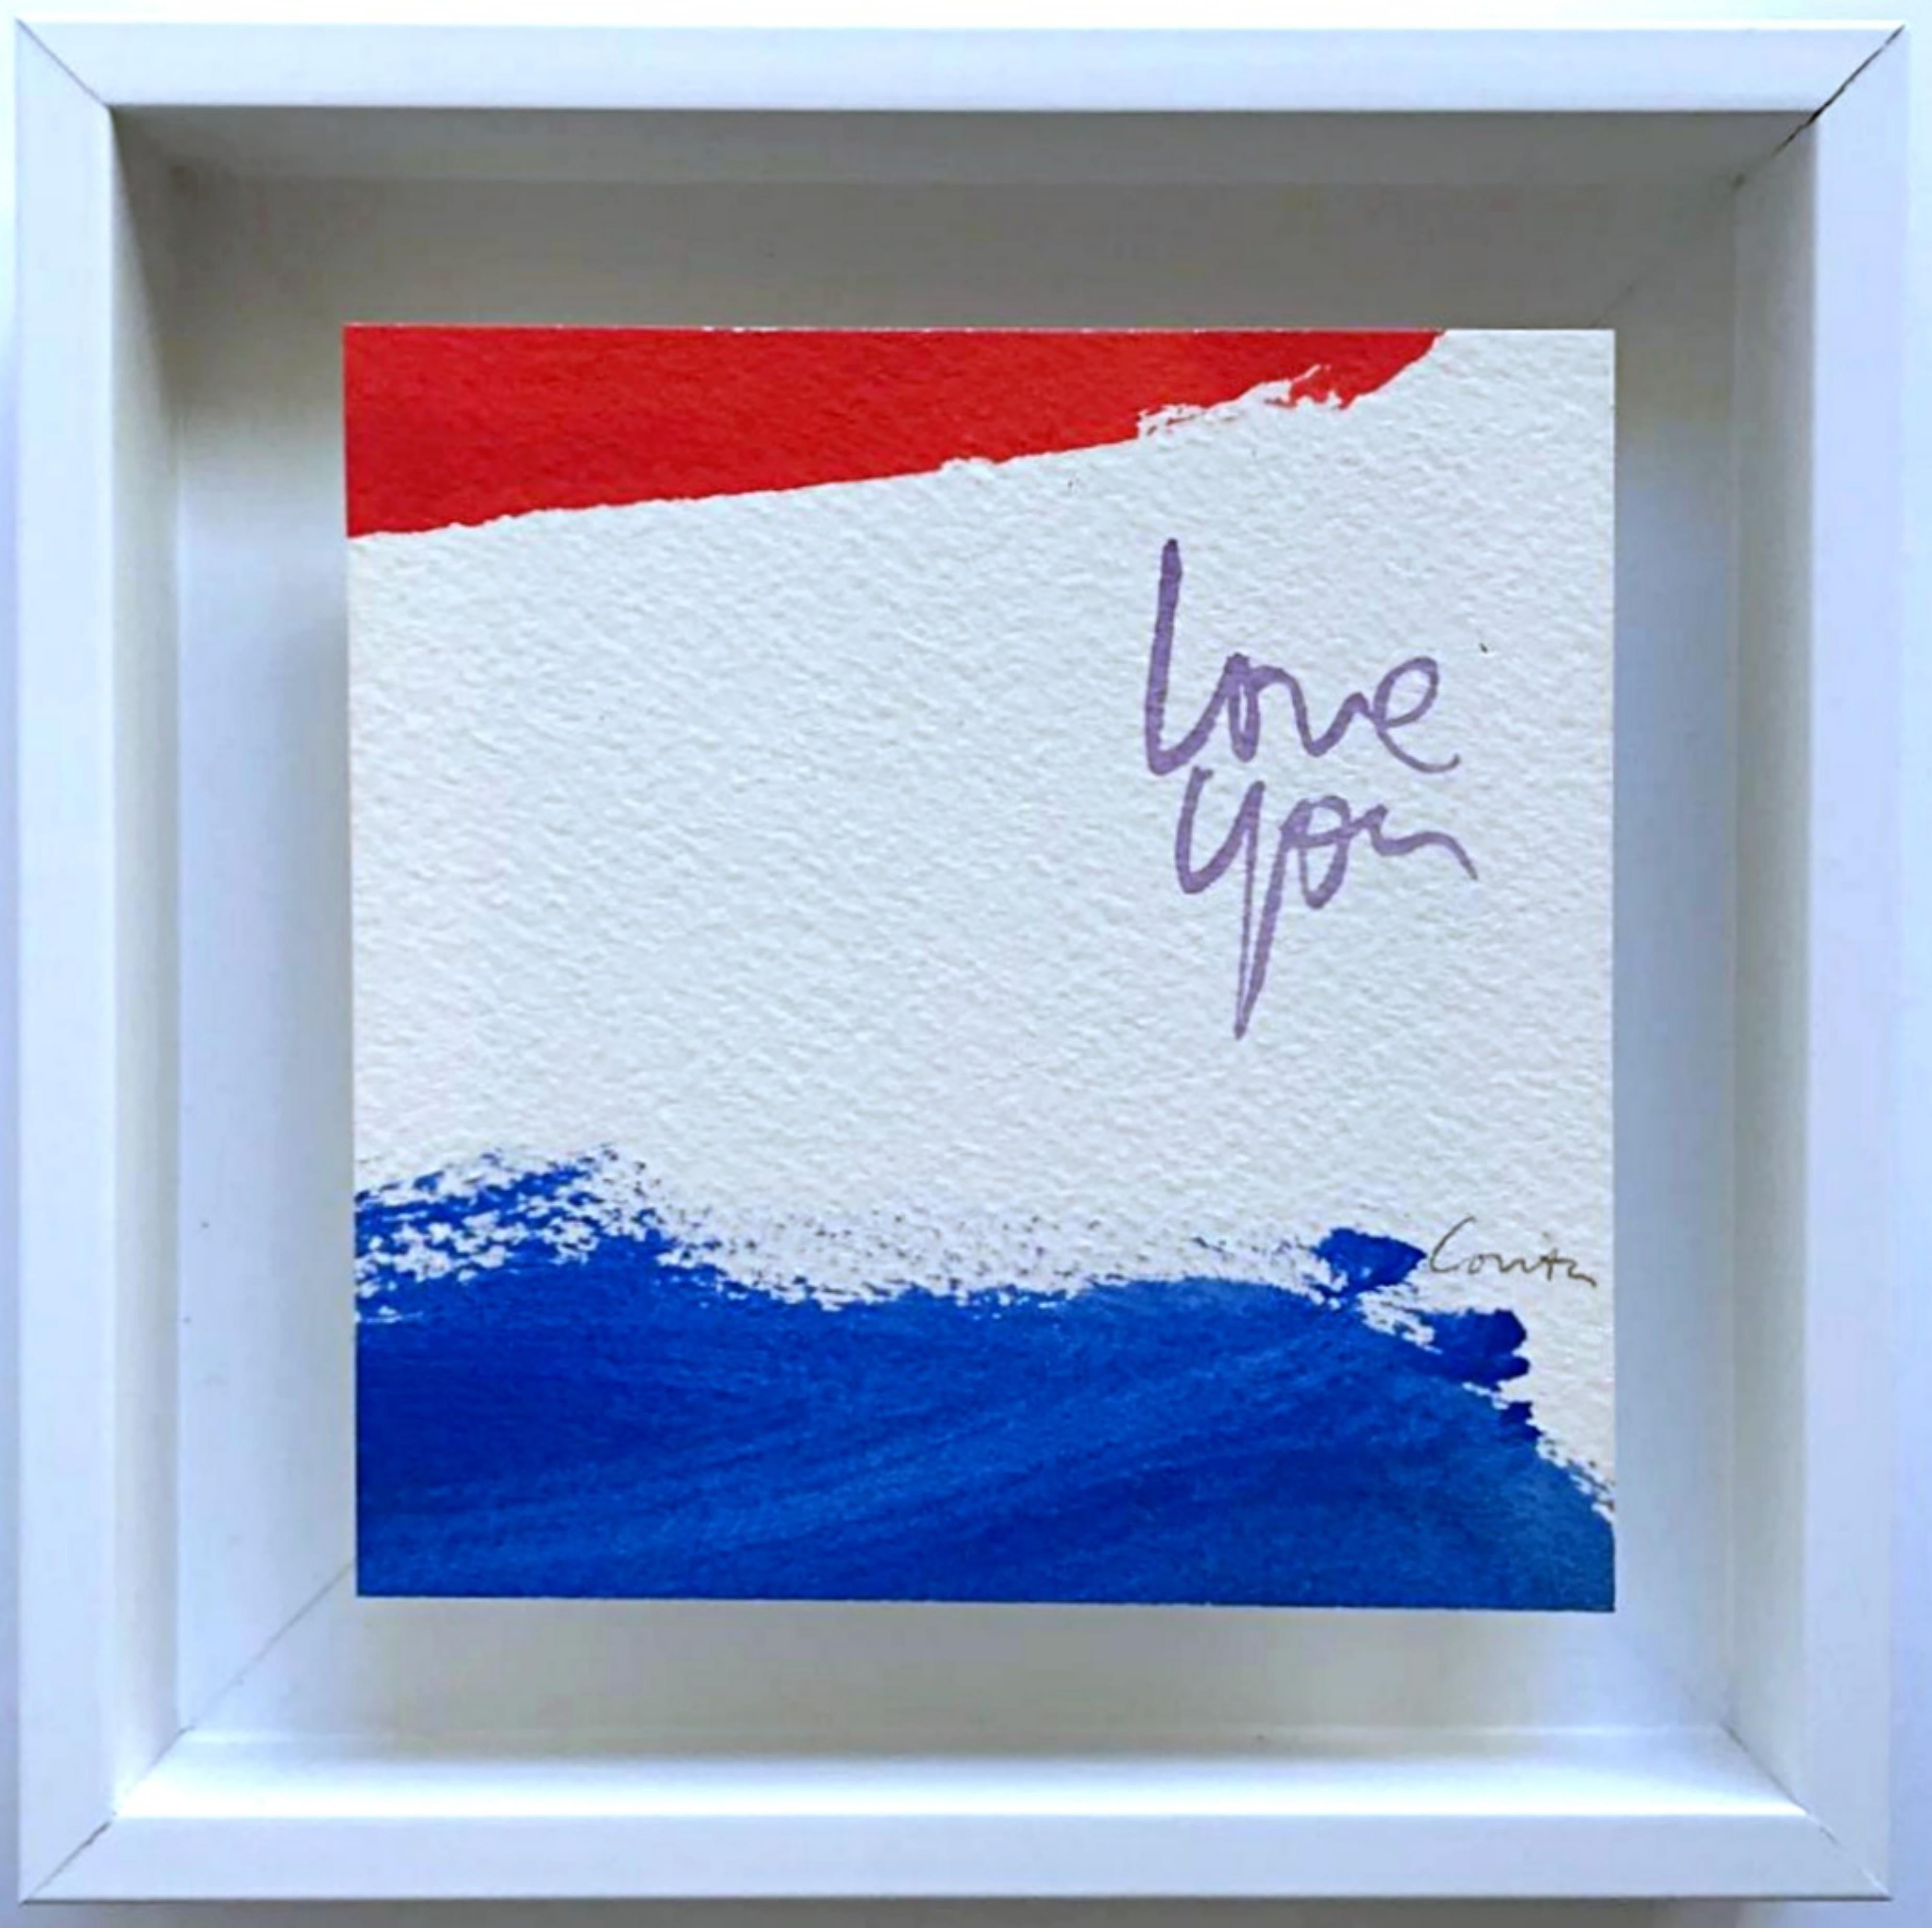 Love You (unique signed watercolor on paper)